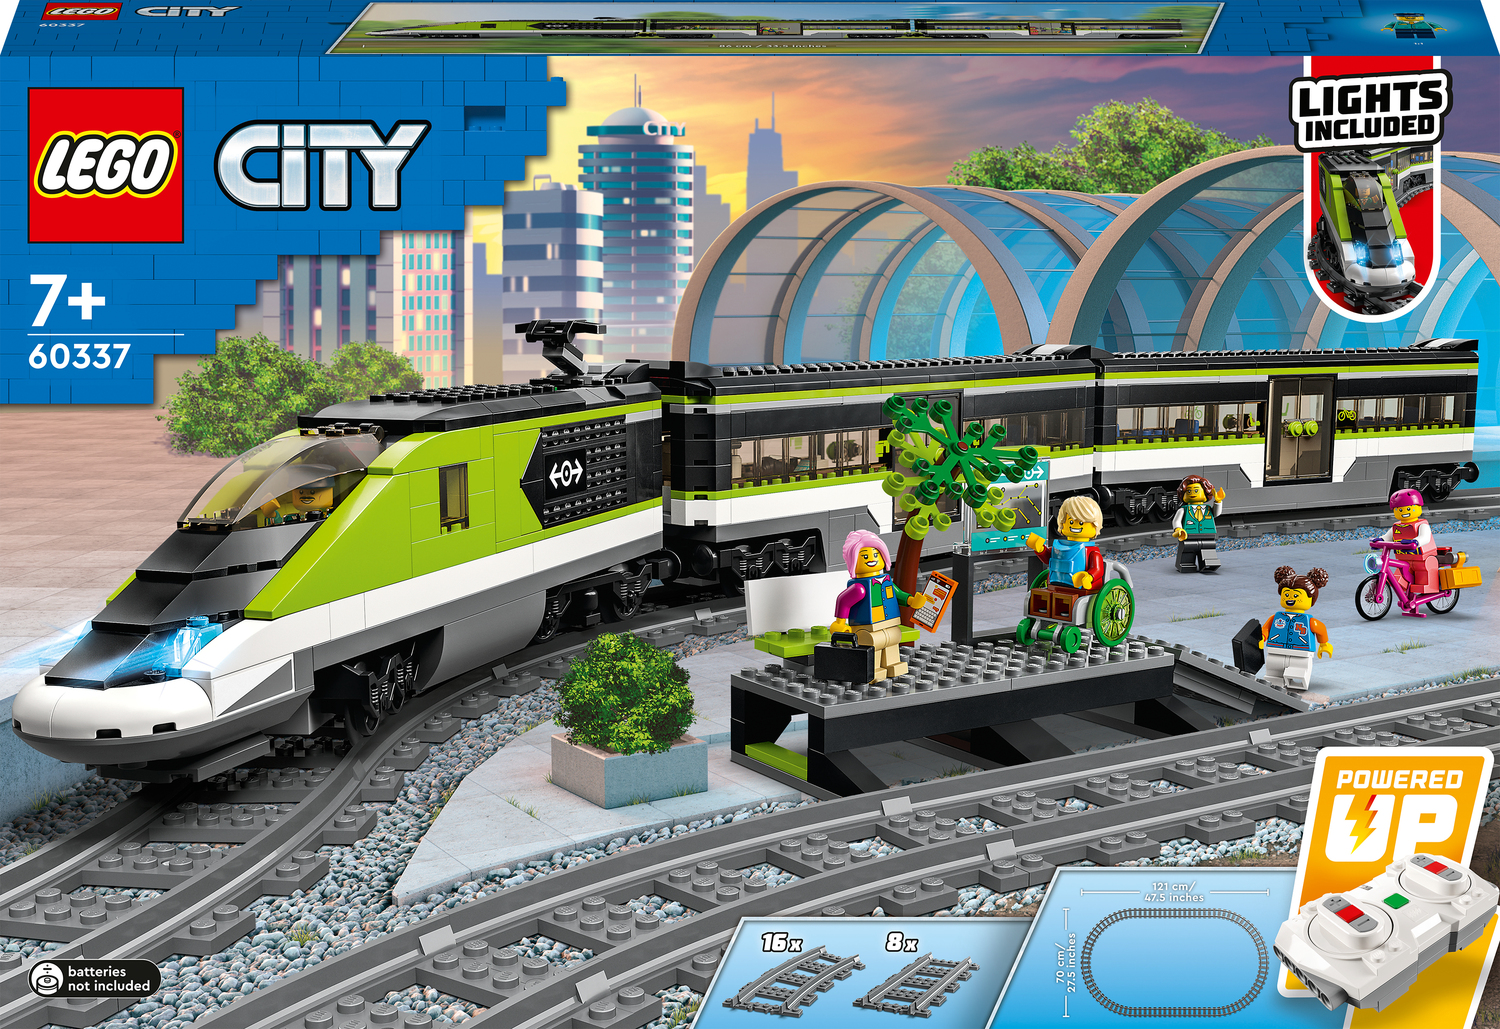 Other :: Fun :: Lego :: LEGO City Passenger Rc Train Toy, Construction  Track Set for Kids